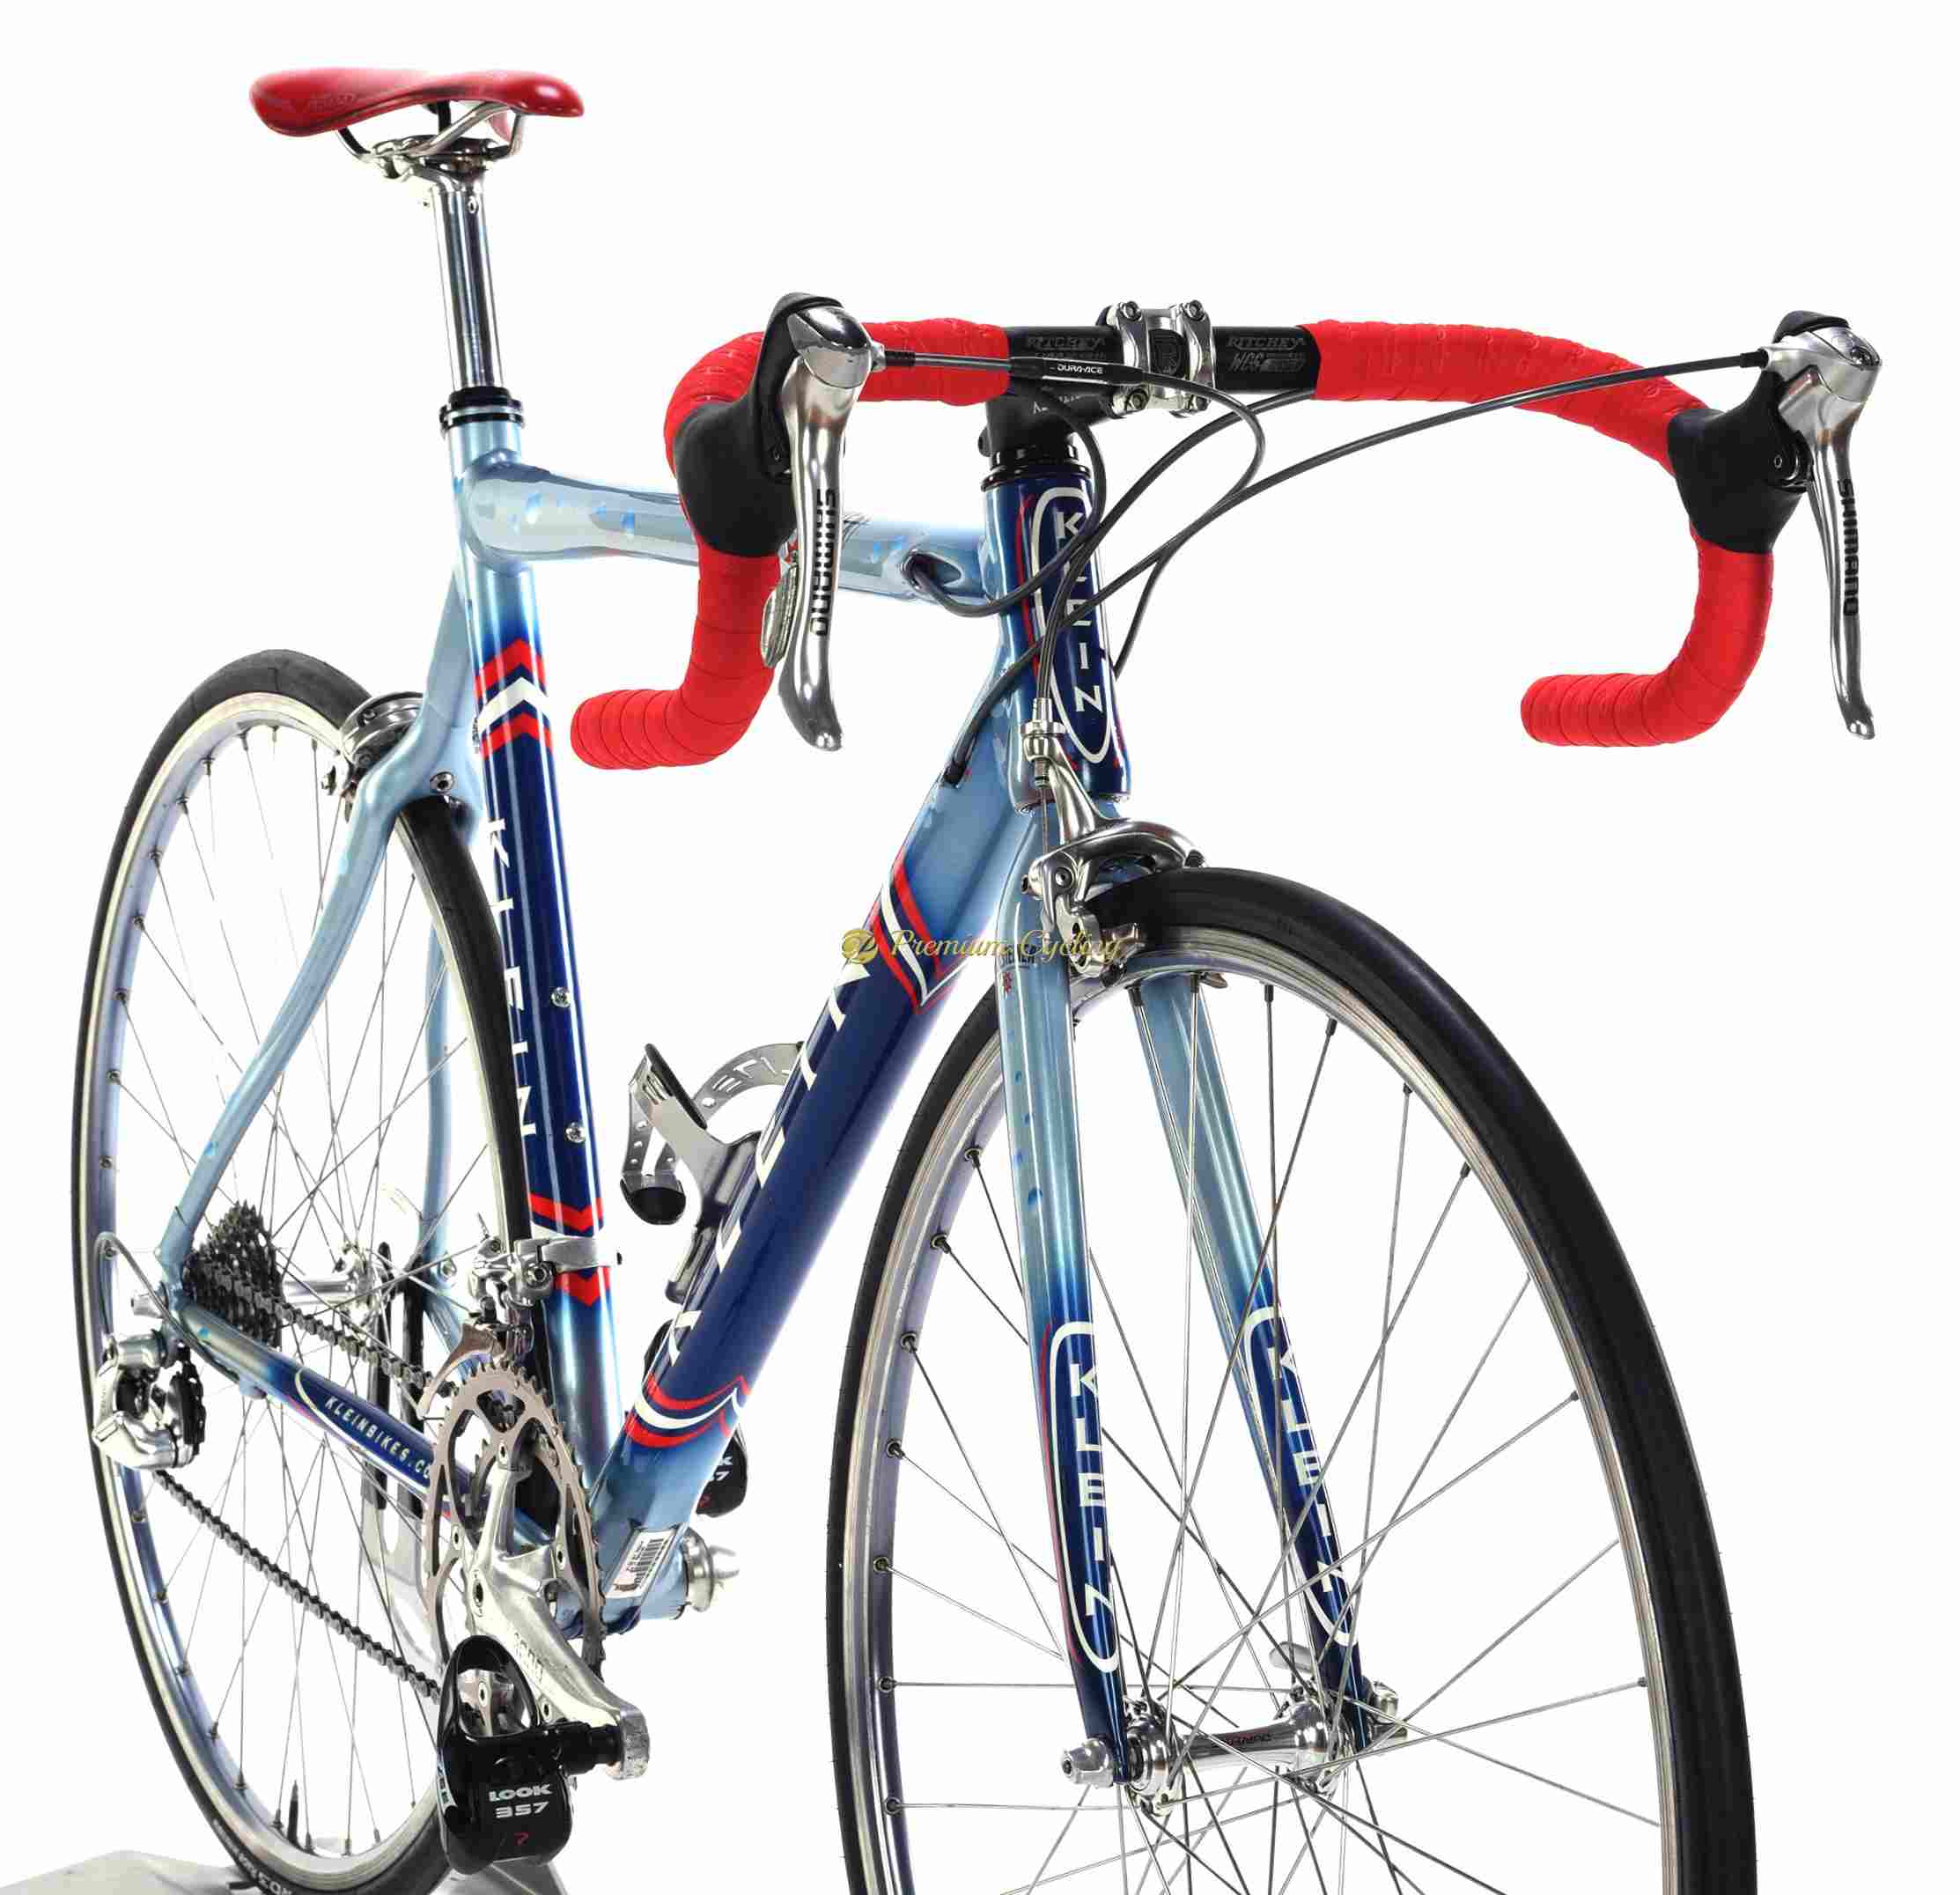 Noord plan Schaar KLEIN Quantum Pro – Team Gerolsteiner 2002 – SOLD – Premium Cycling –  Website for steel and collectible vintage bikes, parts and clothing